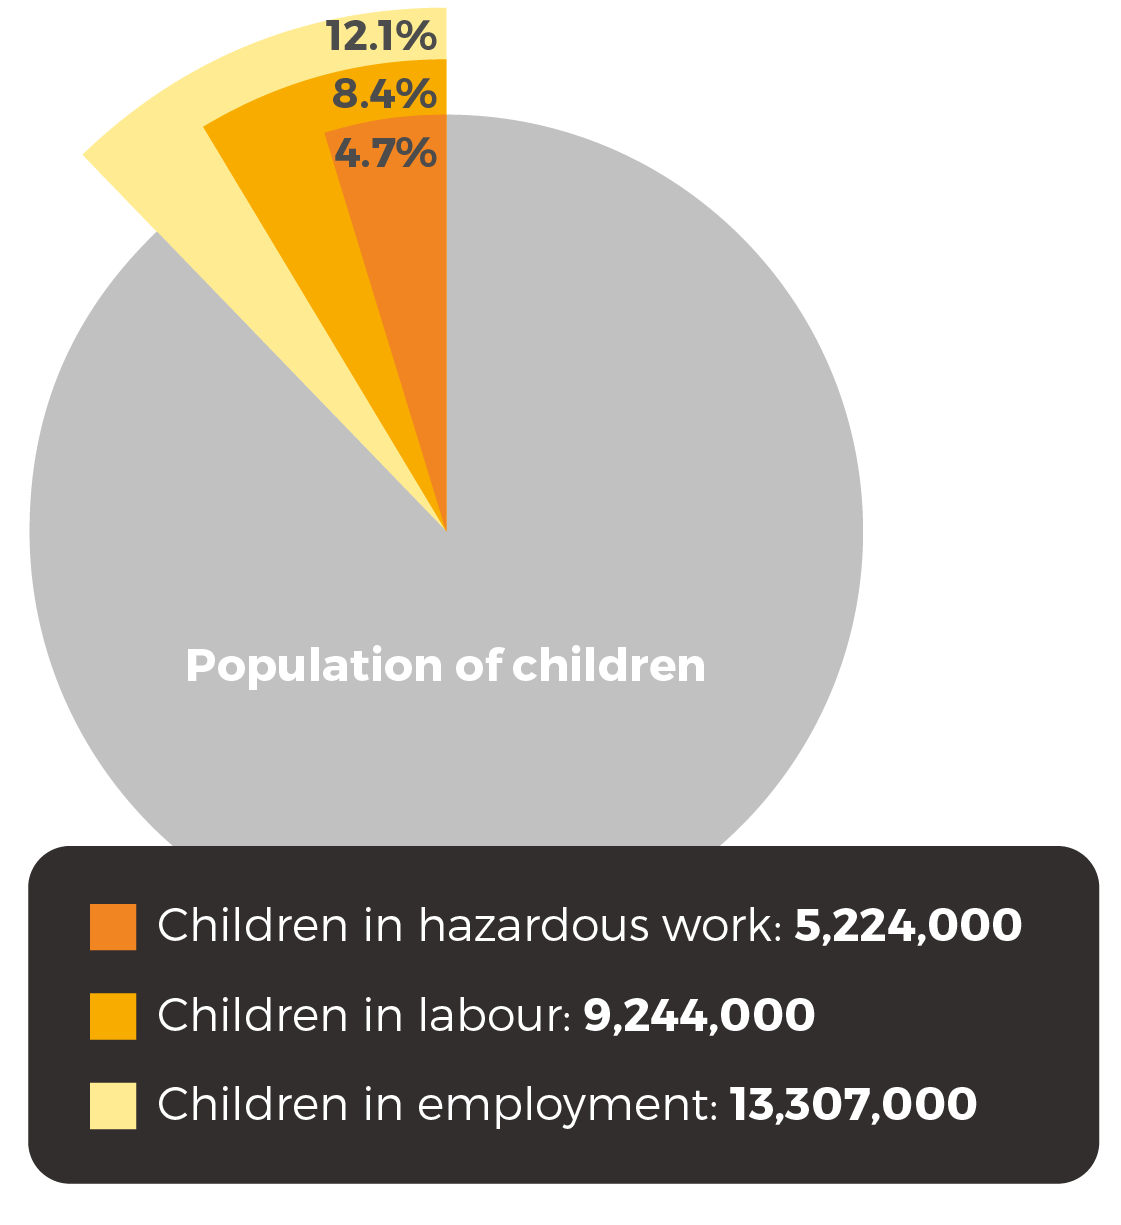 13.3m children are in employment; 9.2m are in child labour and 5.2m in hazardous work 